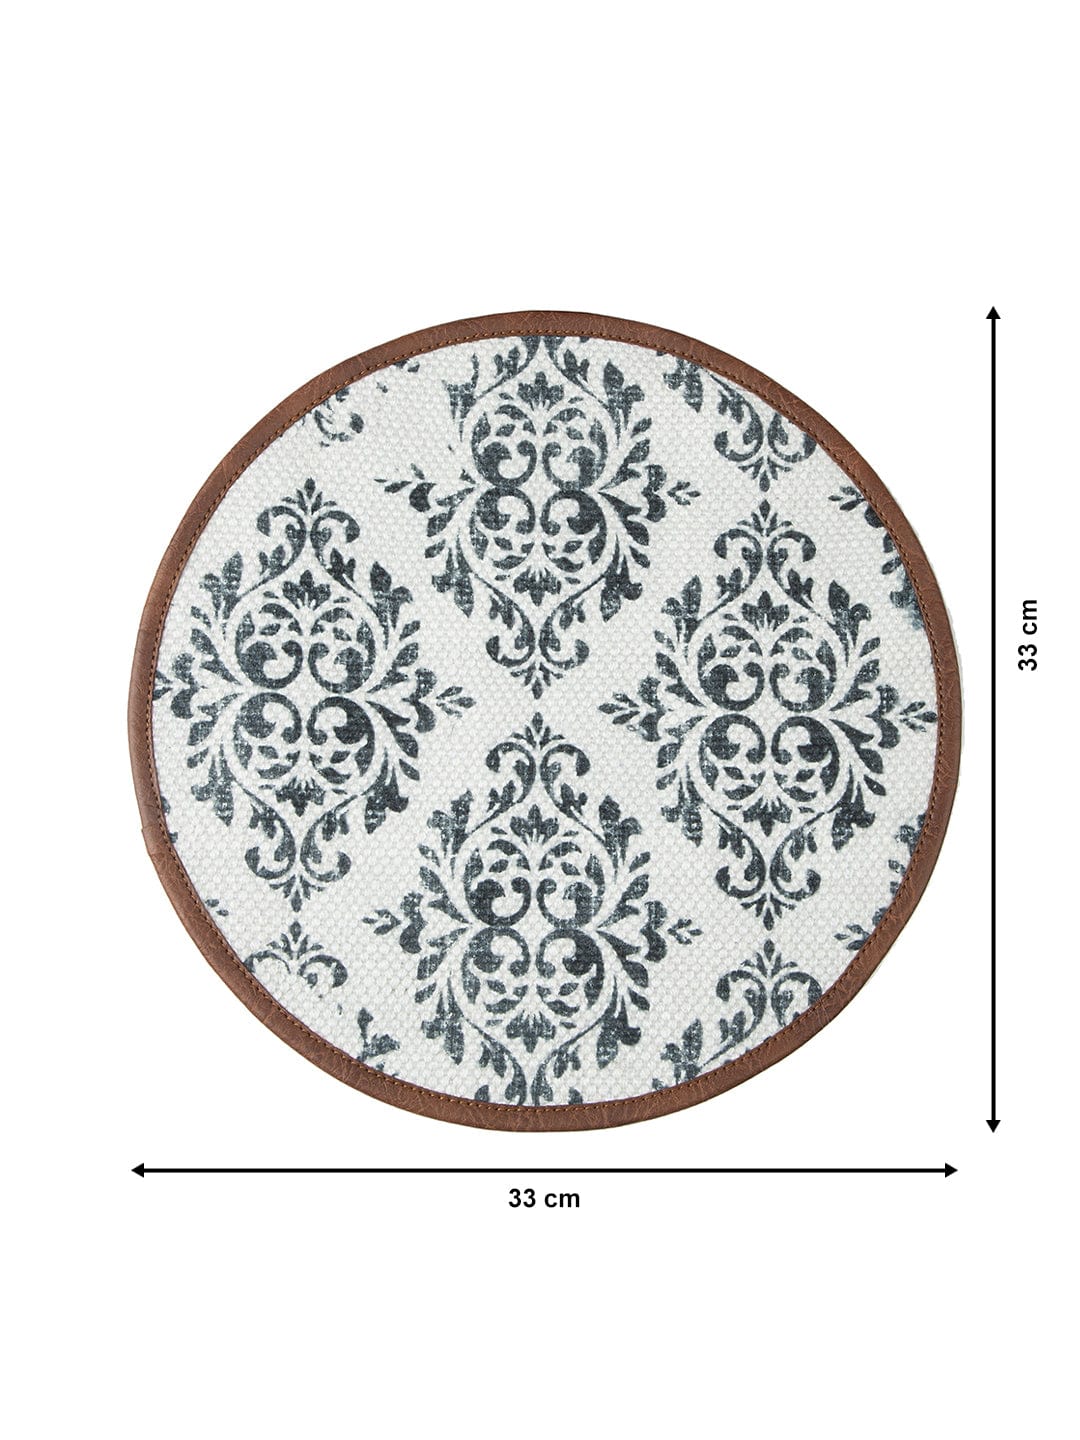 Mona-B Bag Mona B Set of 2 Printed Mosaic Placemats, 13 INCH Round, Best for Bed-Side Table/Center Table, Dining Table/Shelves (Trellis)